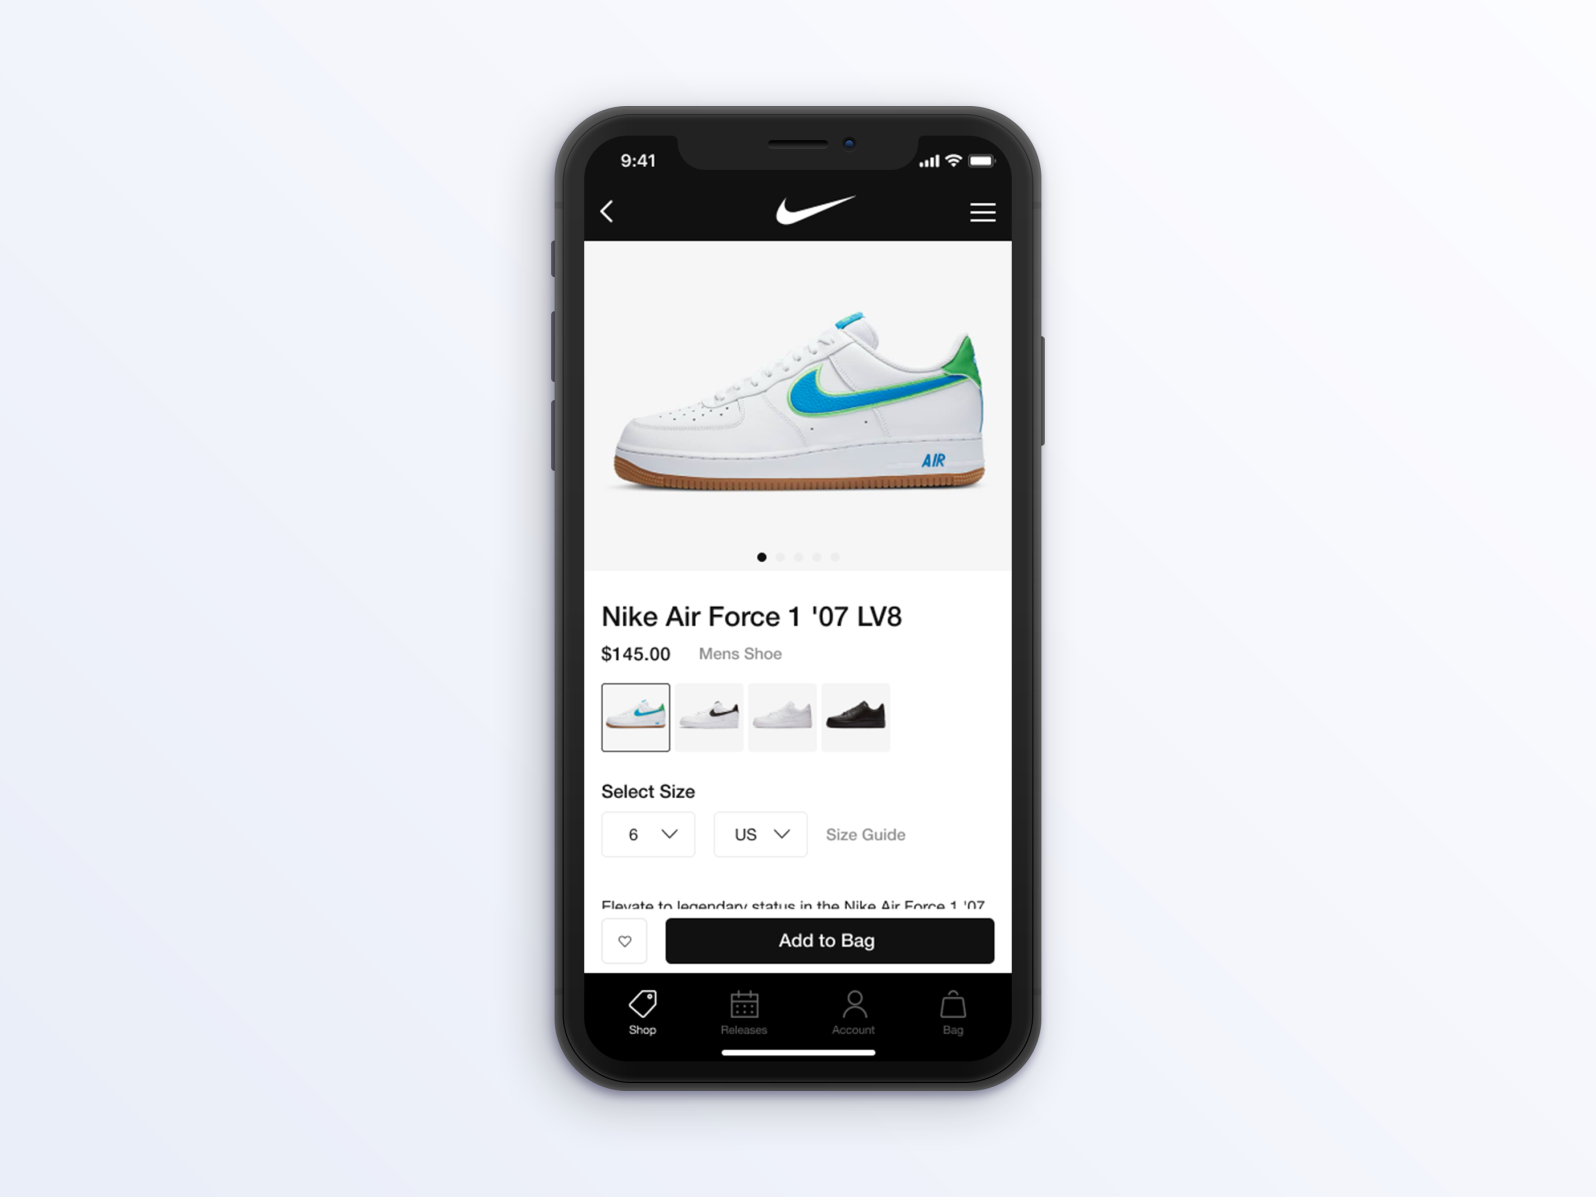 Nike Product Description Page by Uma Danladi on Dribbble